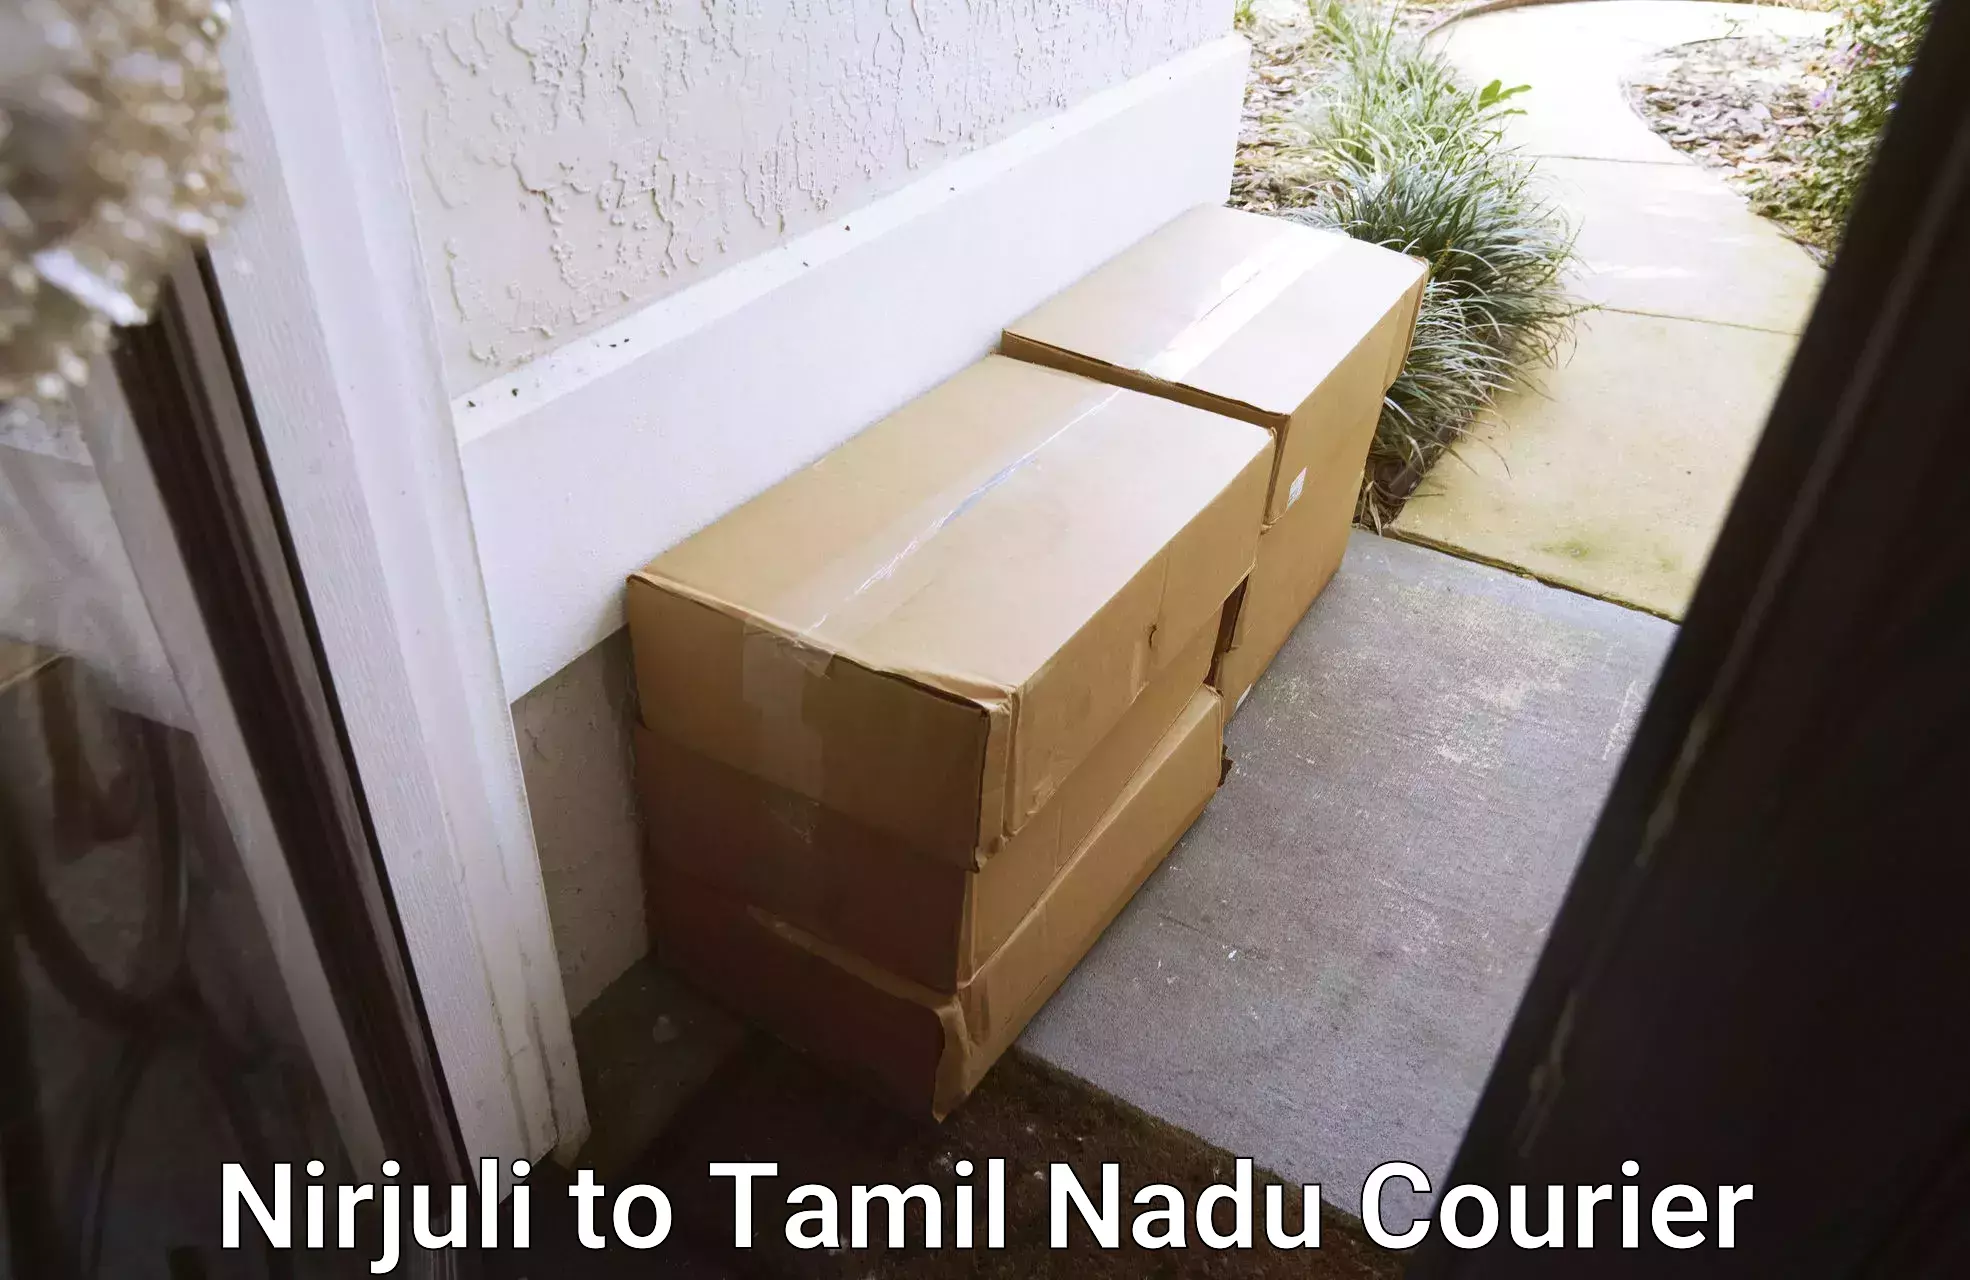 Courier service comparison in Nirjuli to Trichy